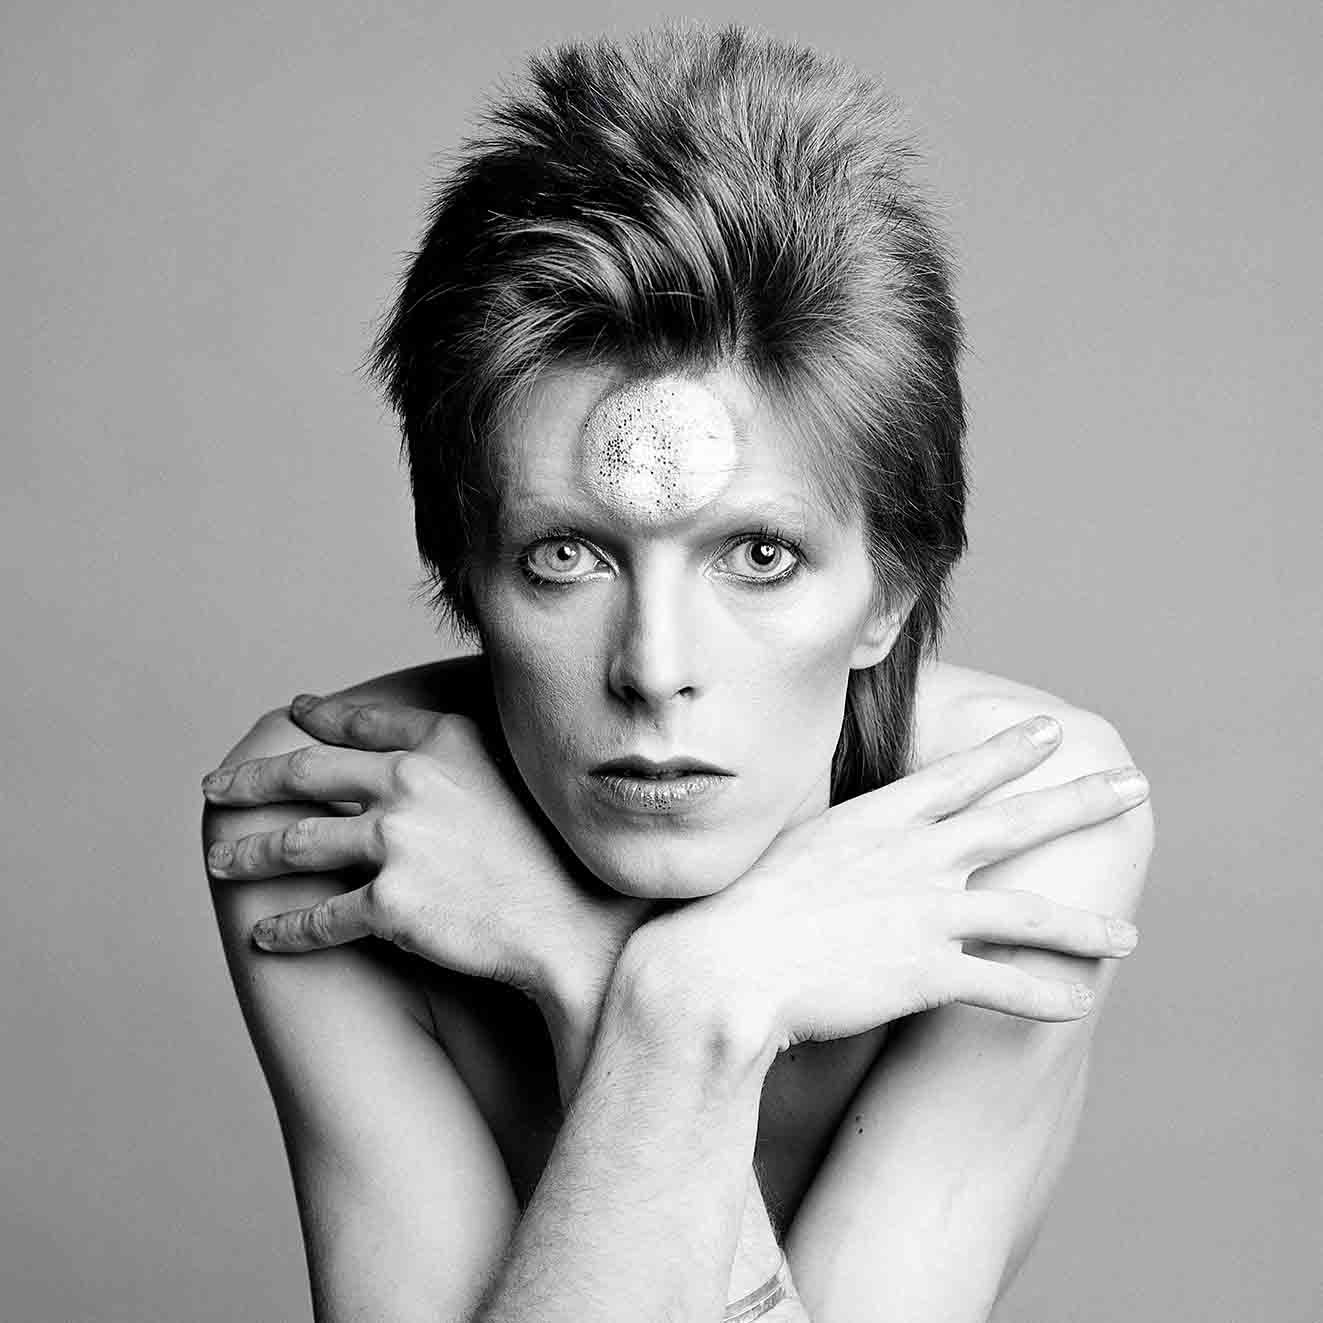 David Bowie And Mick Rock's 'Ziggy Stardust' Photo Book Sees A Reissue